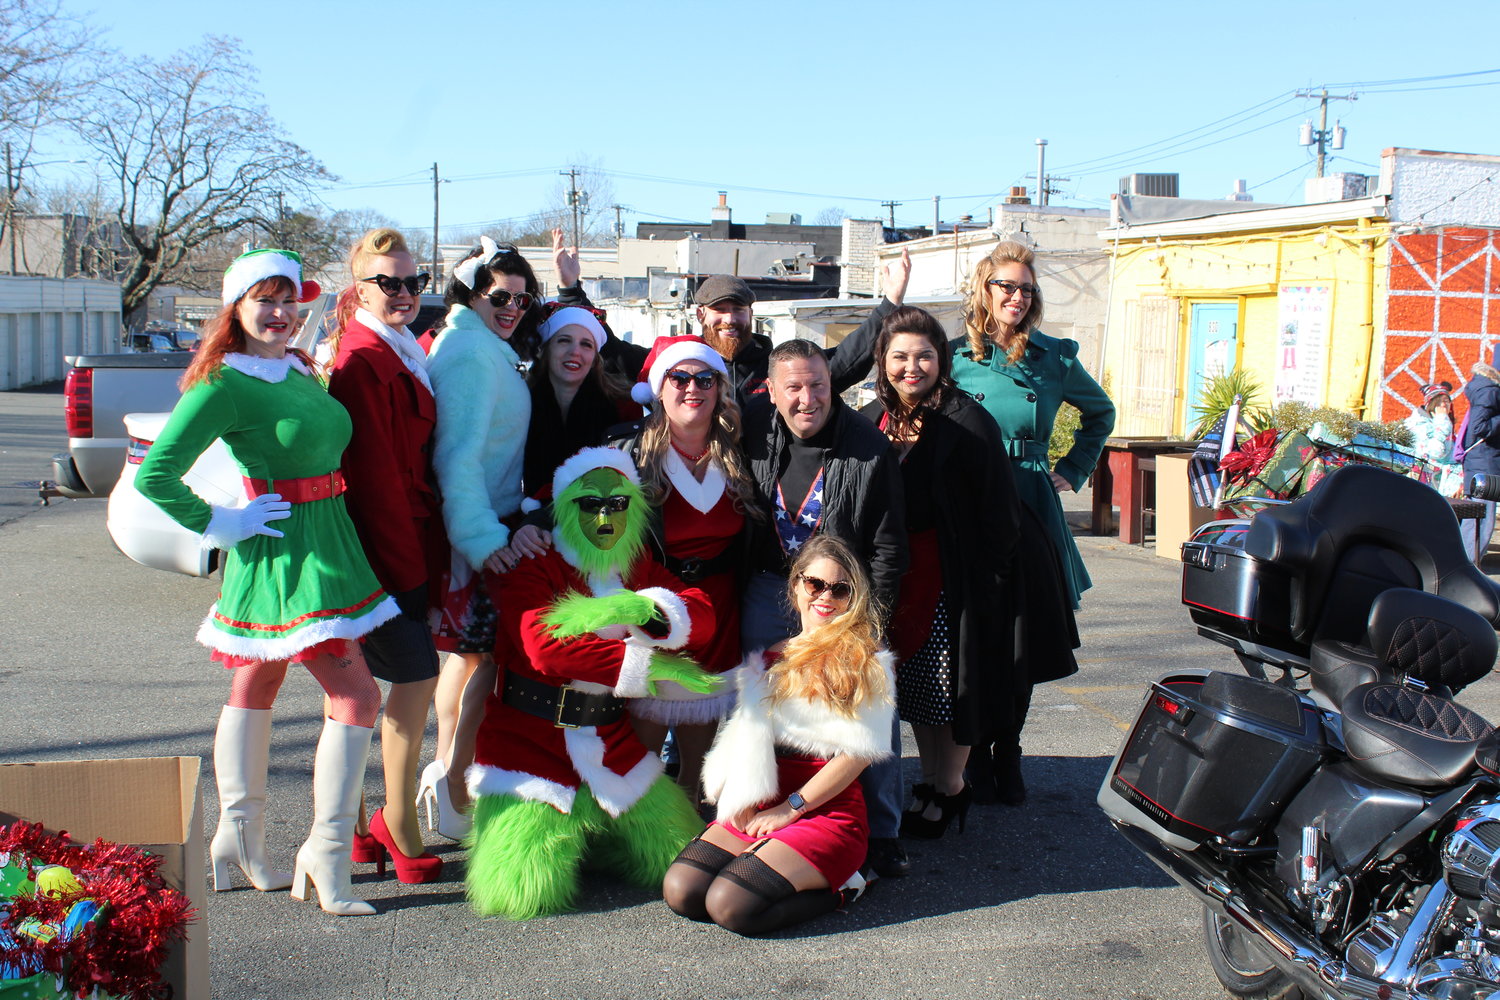 The grinch road in on his motorcycle to spread cheer with the Rescue Vixens, Shawn Sabel, center, and Steven Burke, third from right.